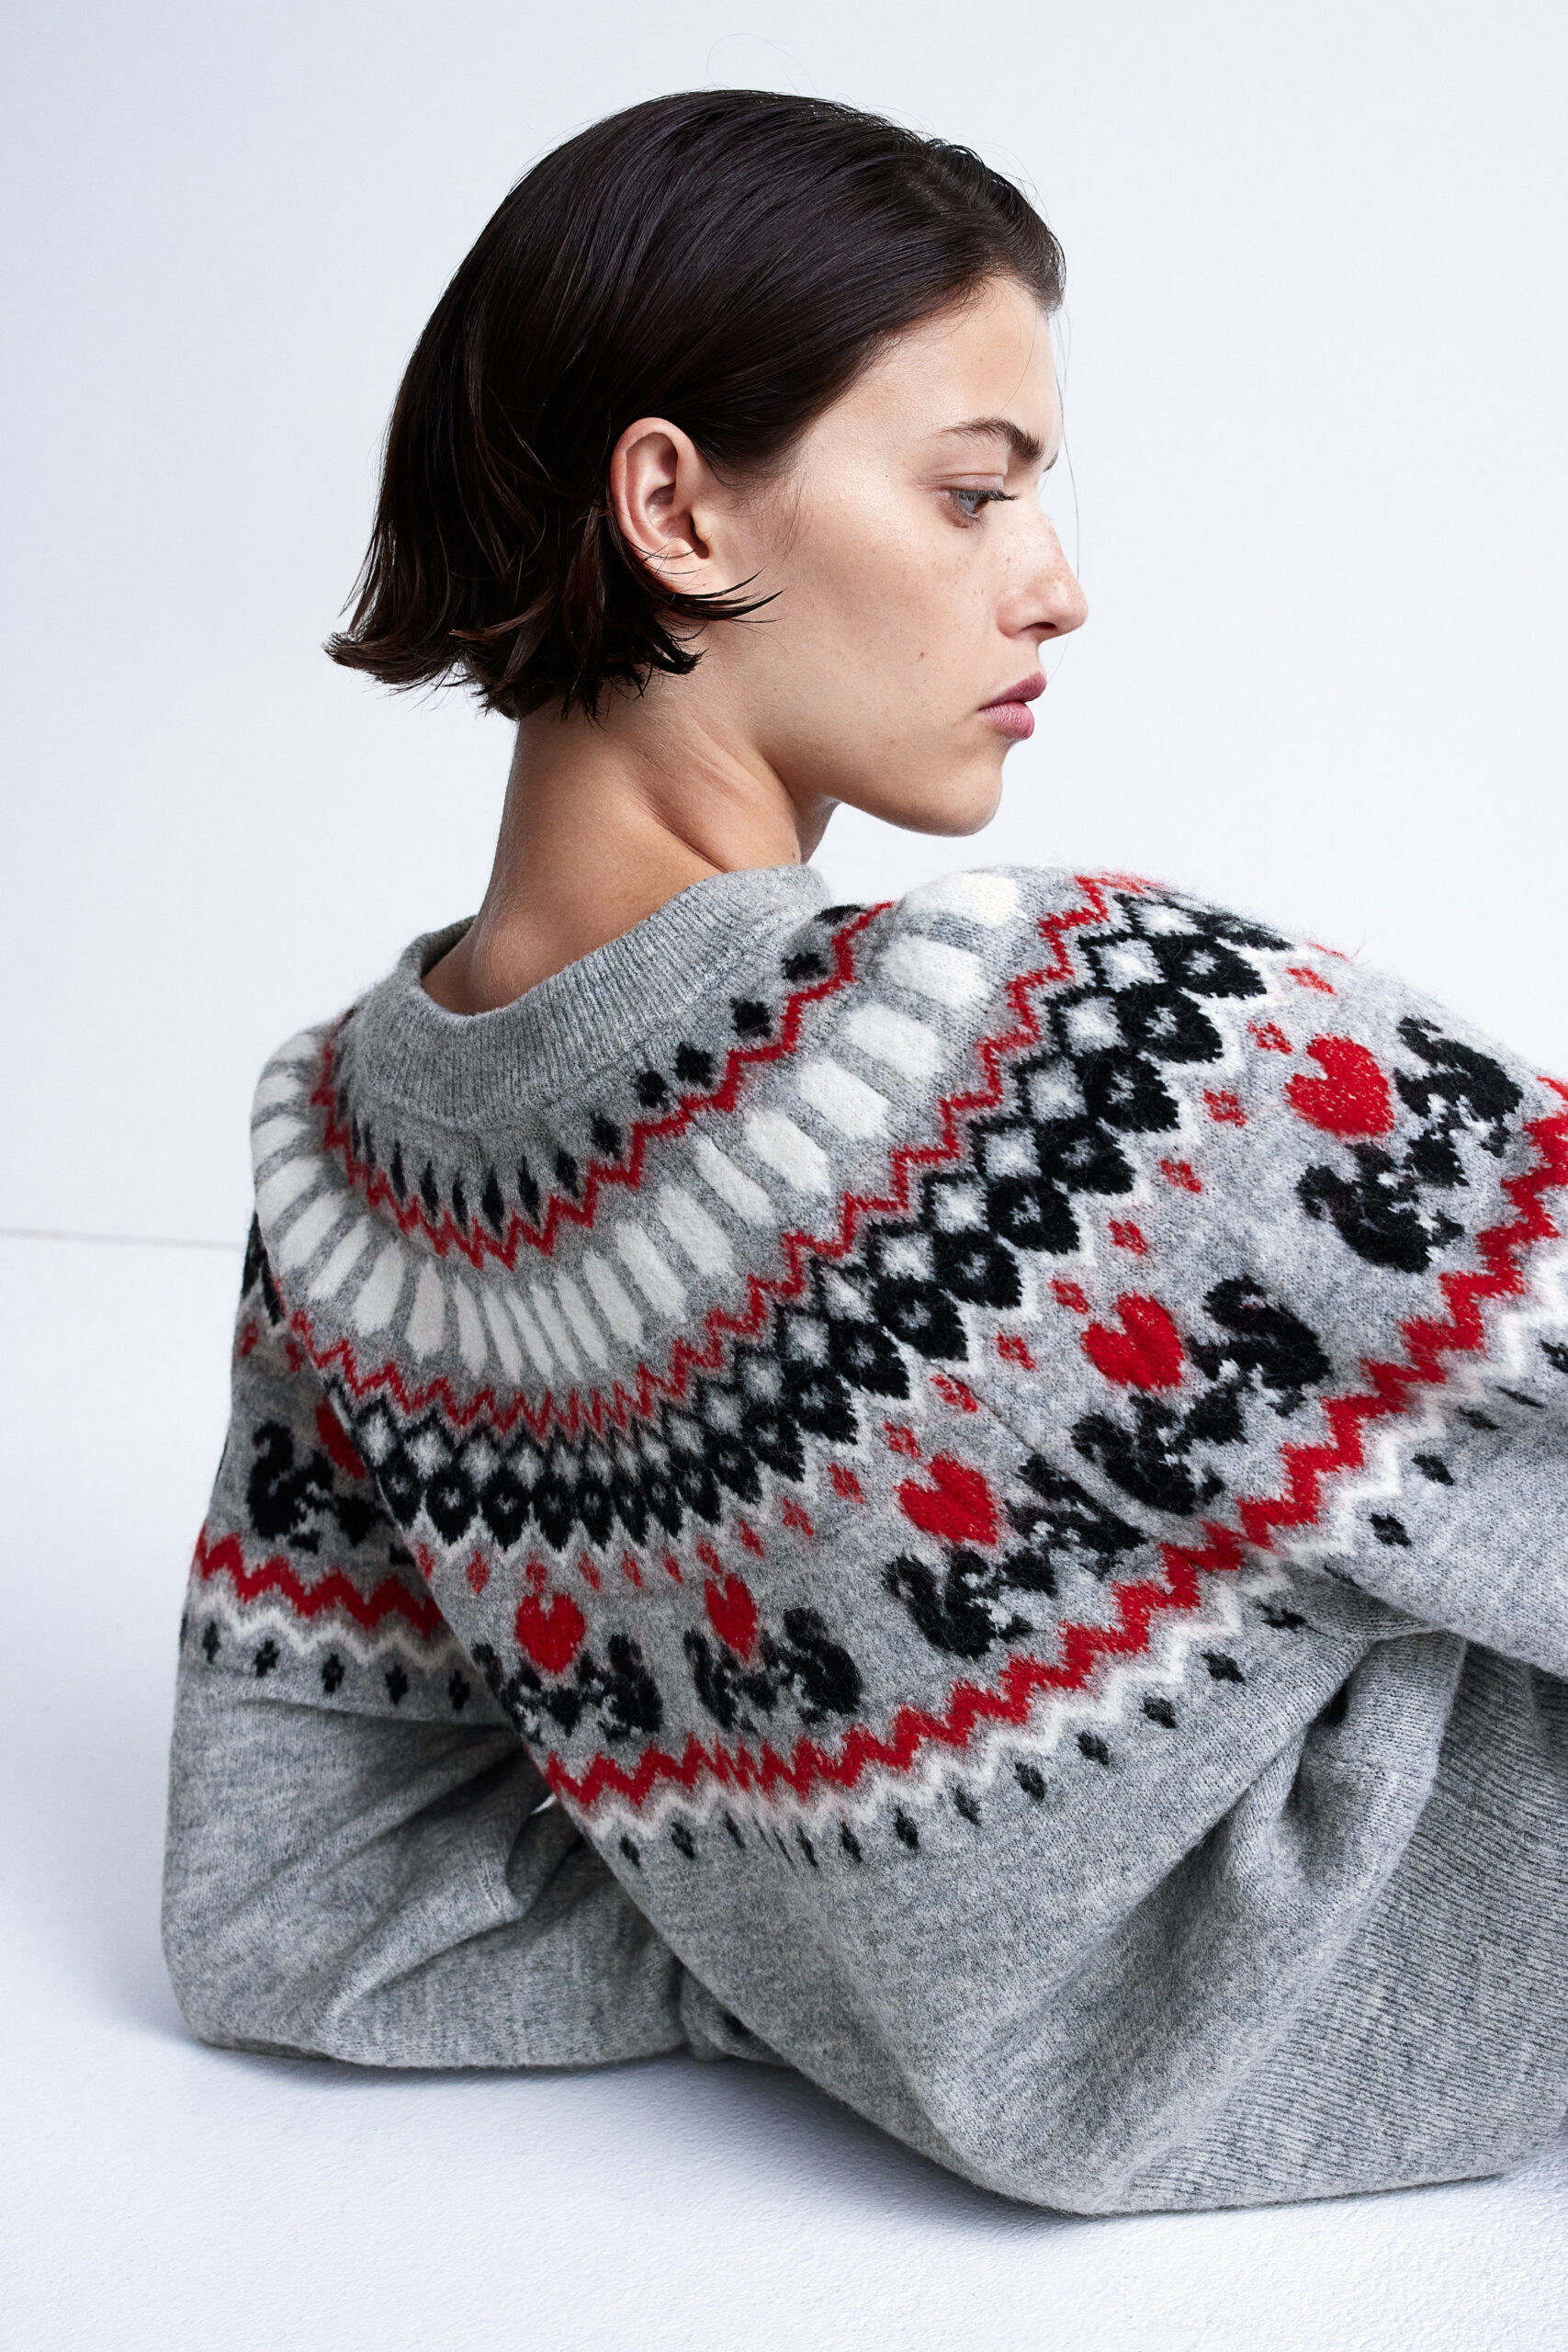 woman wearing knitted grey christmas sweater with raglan sleeves